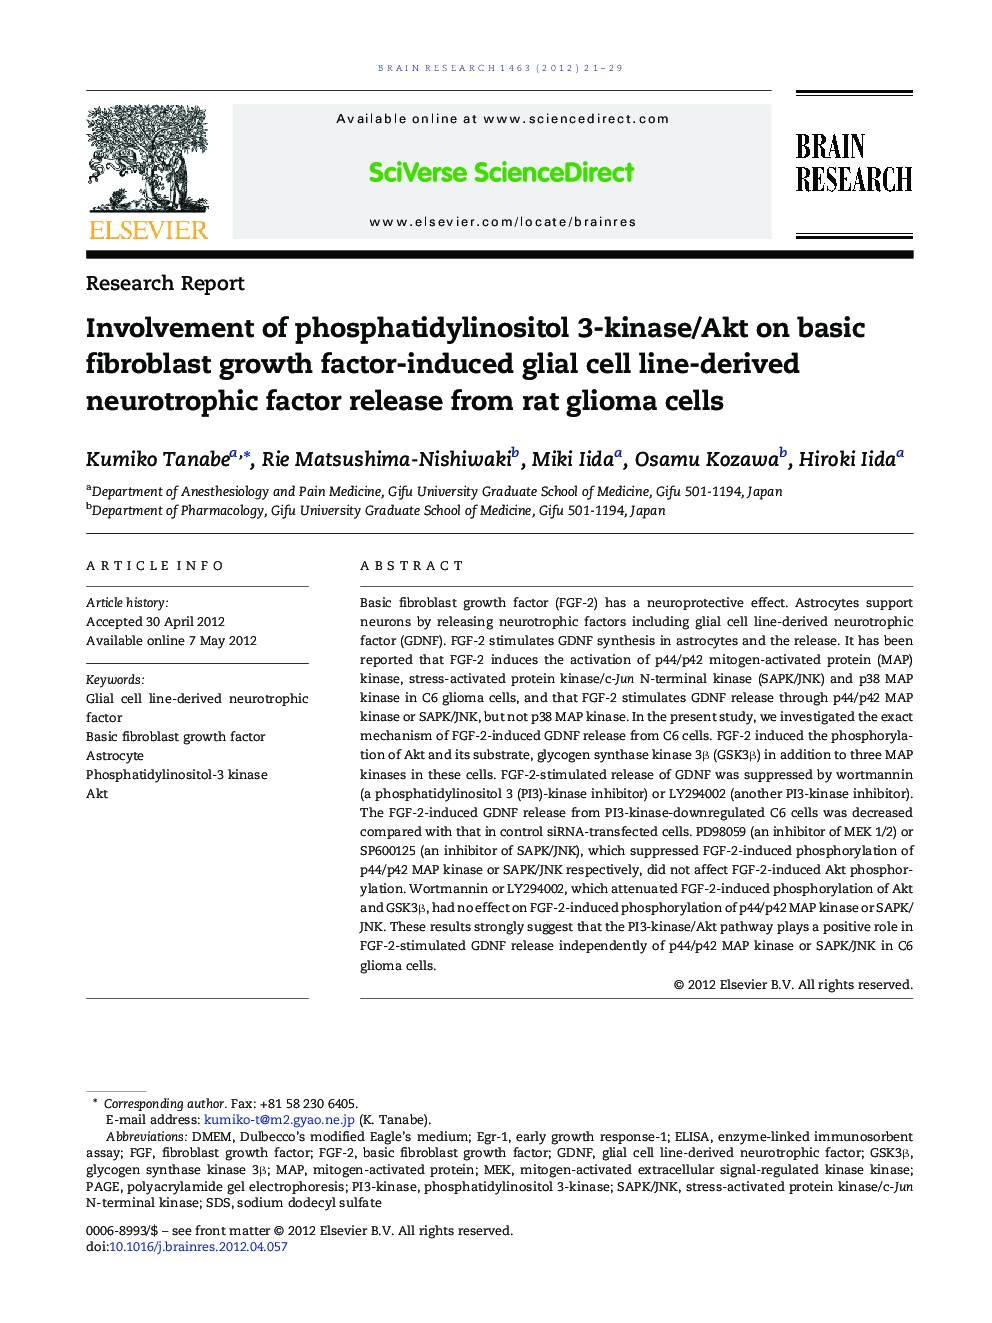 Involvement of phosphatidylinositol 3-kinase/Akt on basic fibroblast growth factor-induced glial cell line-derived neurotrophic factor release from rat glioma cells